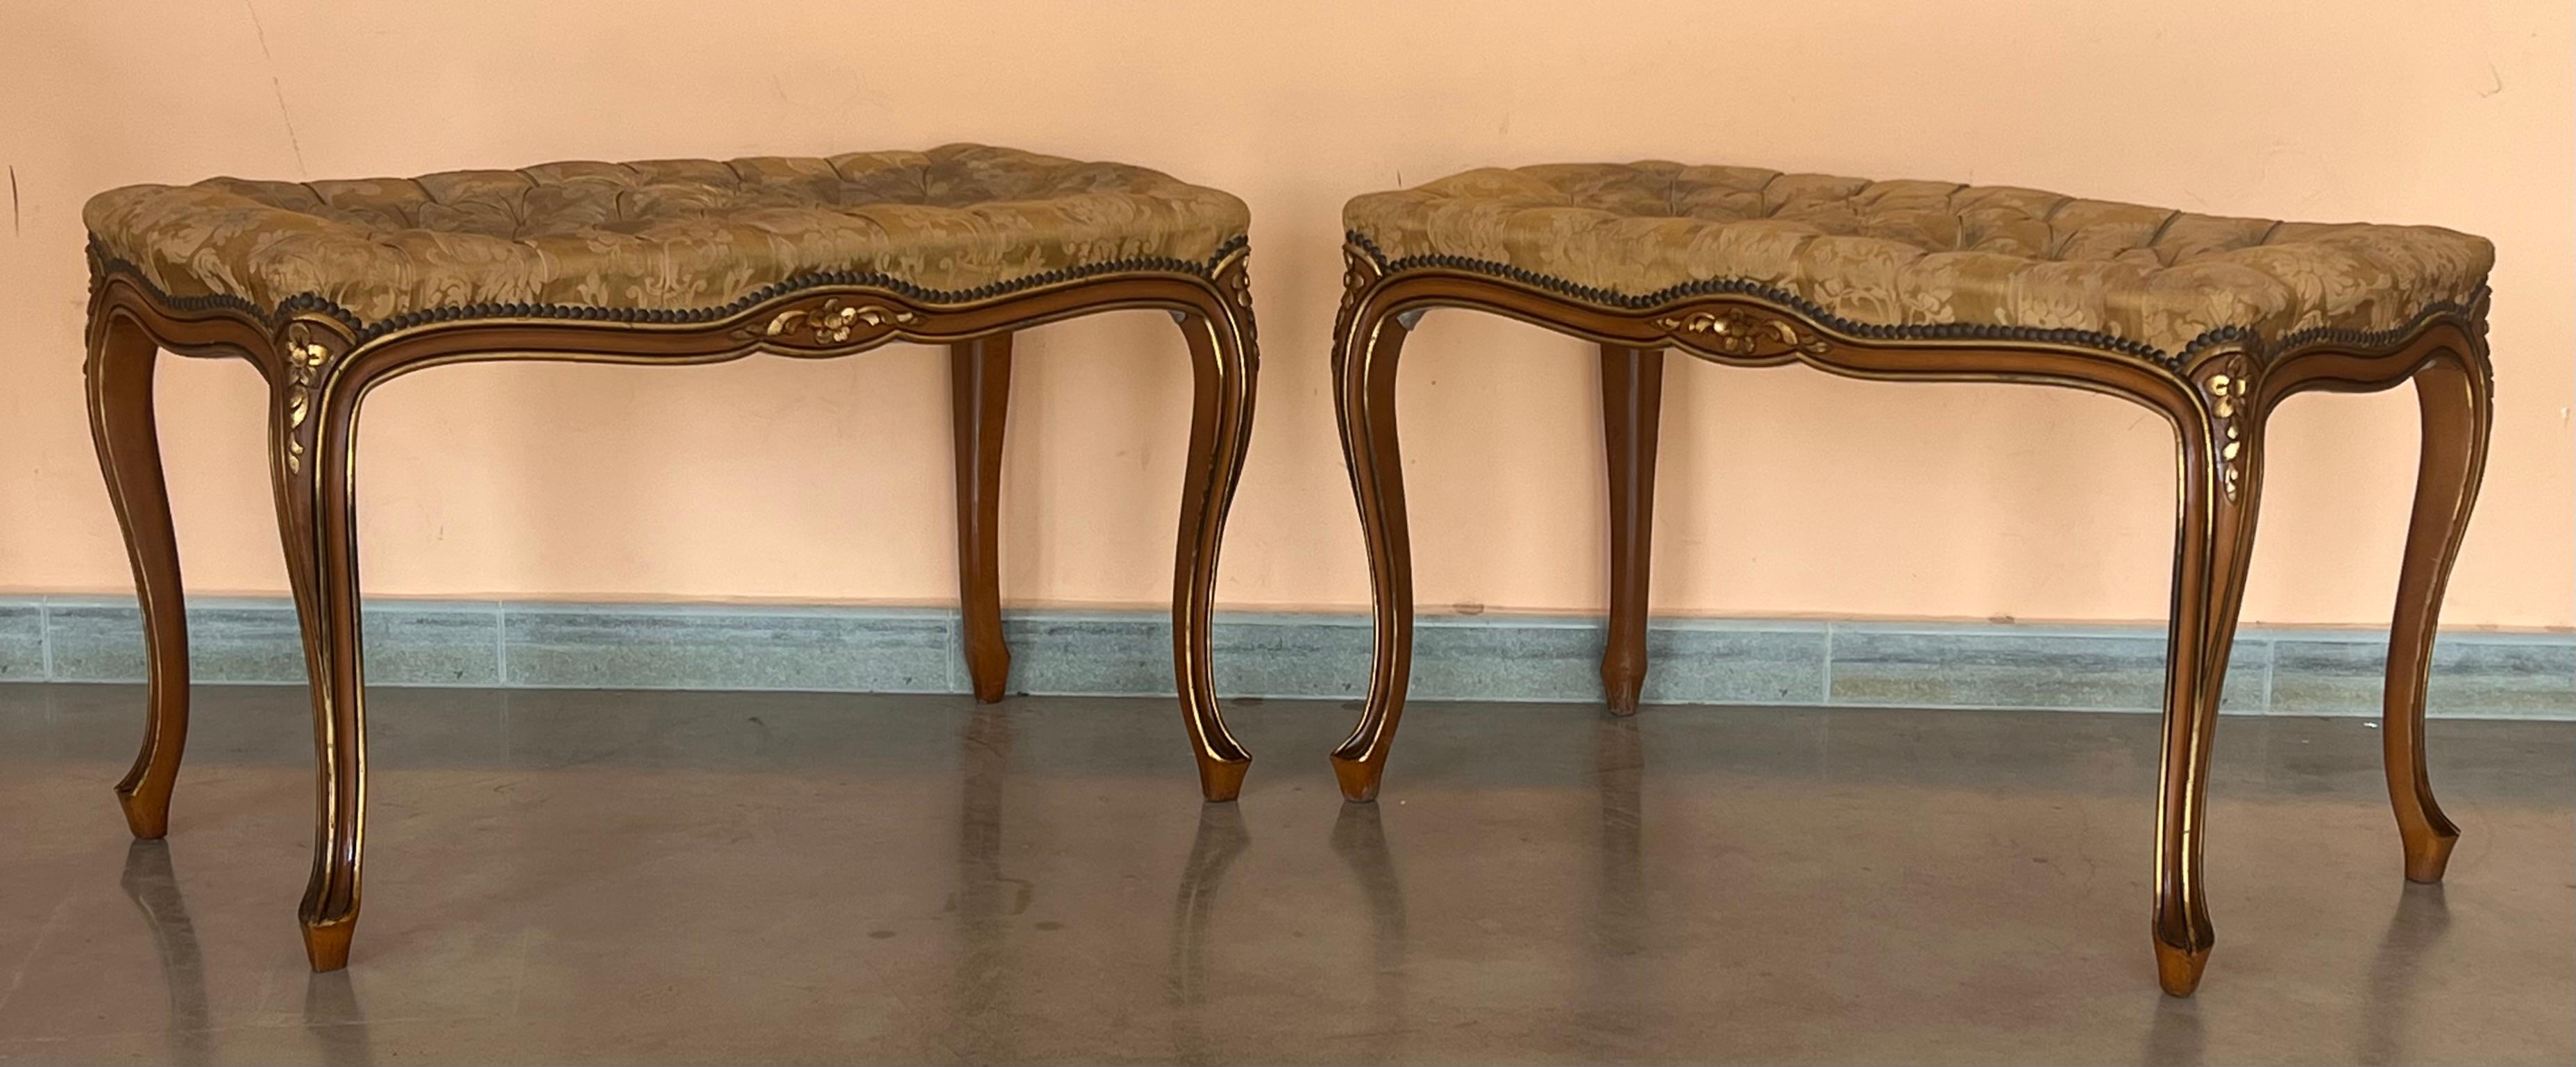 French Provincial Pair of French Tufted Benches with cabriole legs For Sale